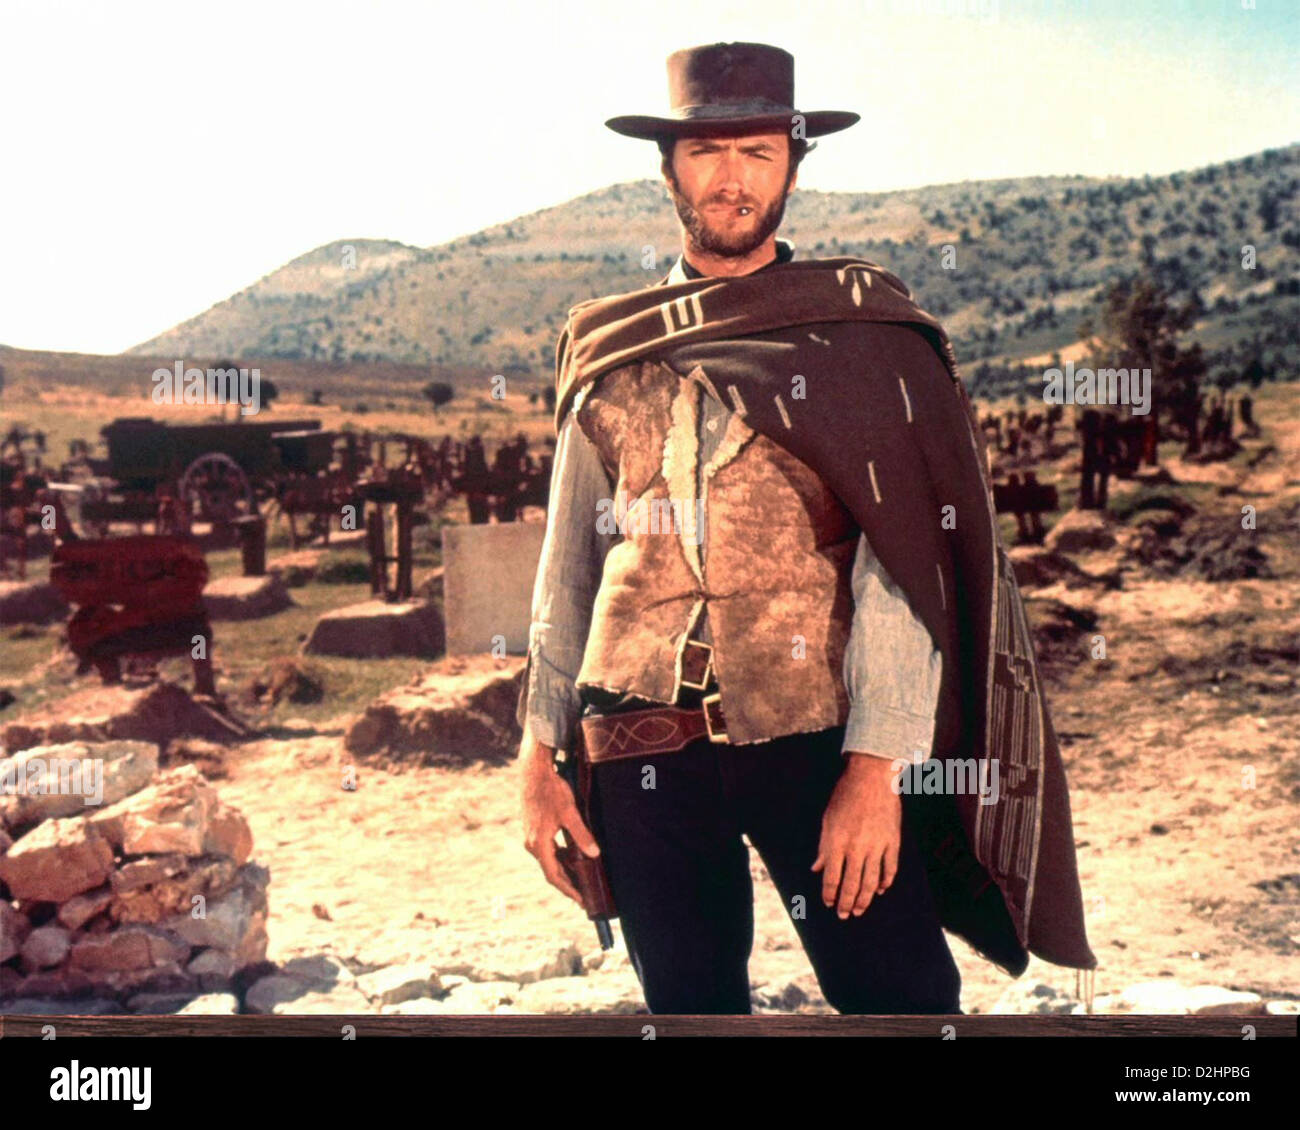 DER gute THE BAD und THE UGLY 1966 PEA-Film mit Clint Eastwood Stockfoto